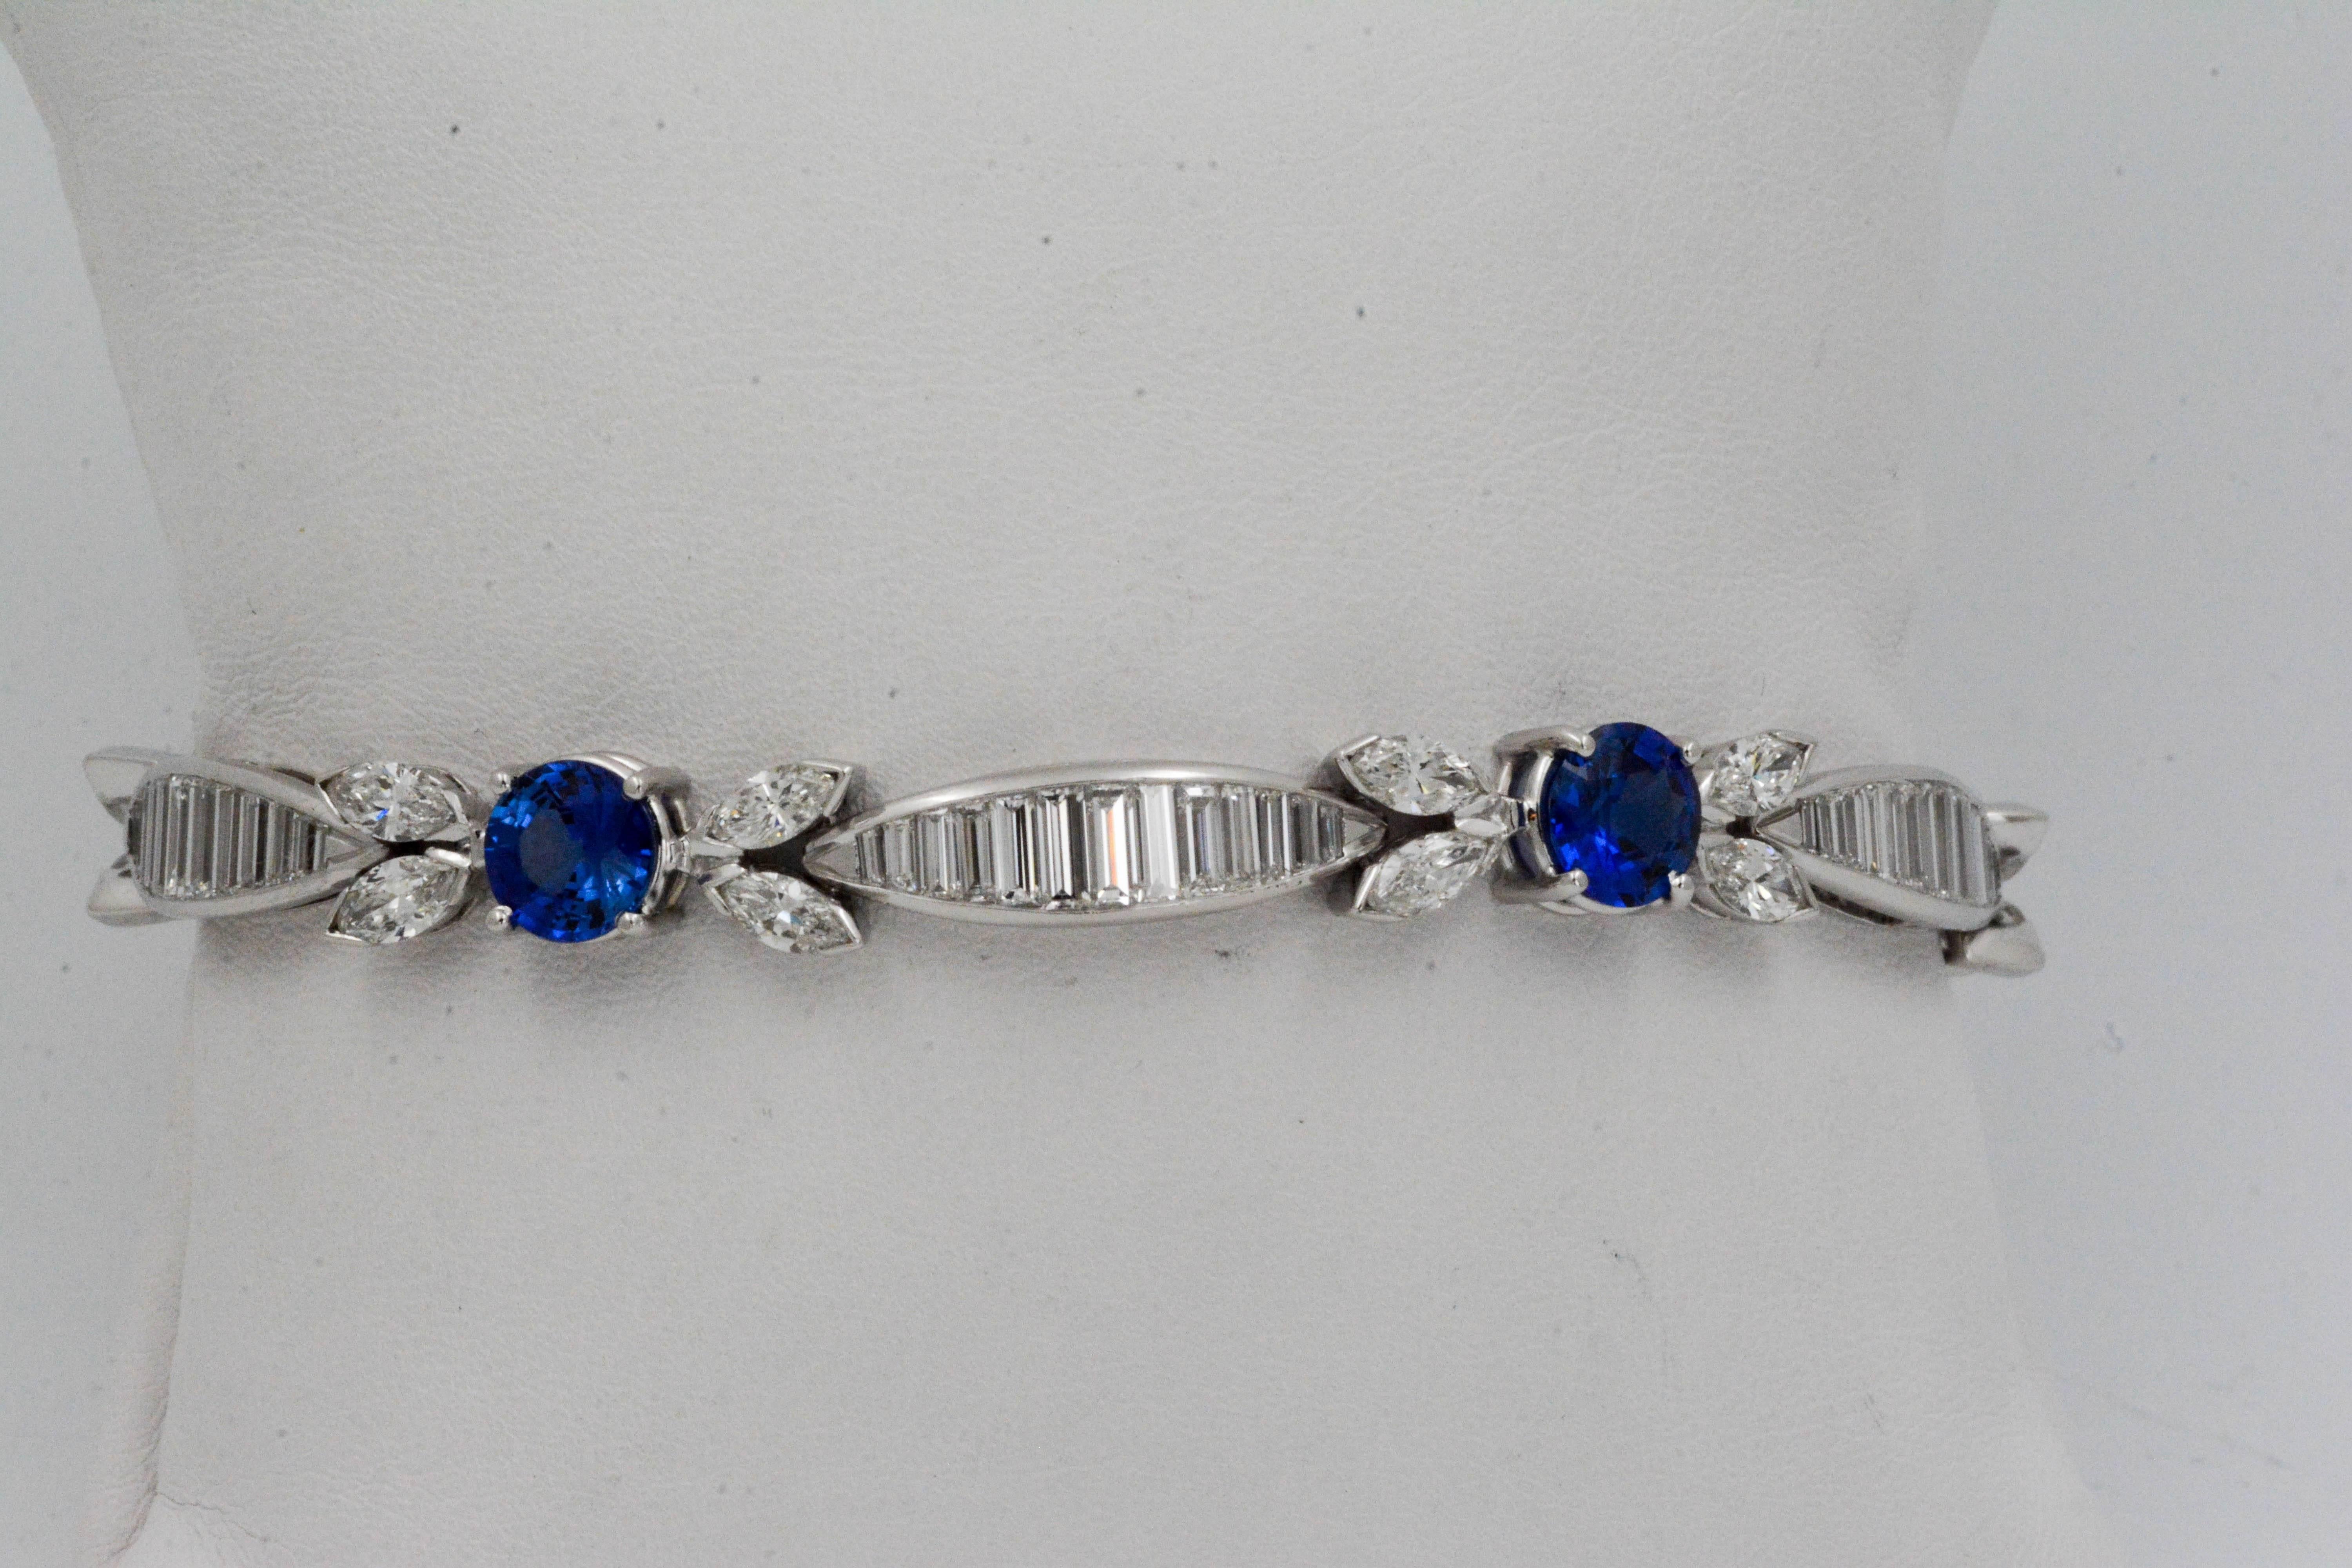 Brilliant, sophisticated, sparkly--and oh so irresistible, this Sapphire and Diamond Platinum bracelet has distinctive charm. 5 round faceted blue sapphires (6.85 carat total weight) are surrounded by 20 ravishing marquise diamonds, set in two on